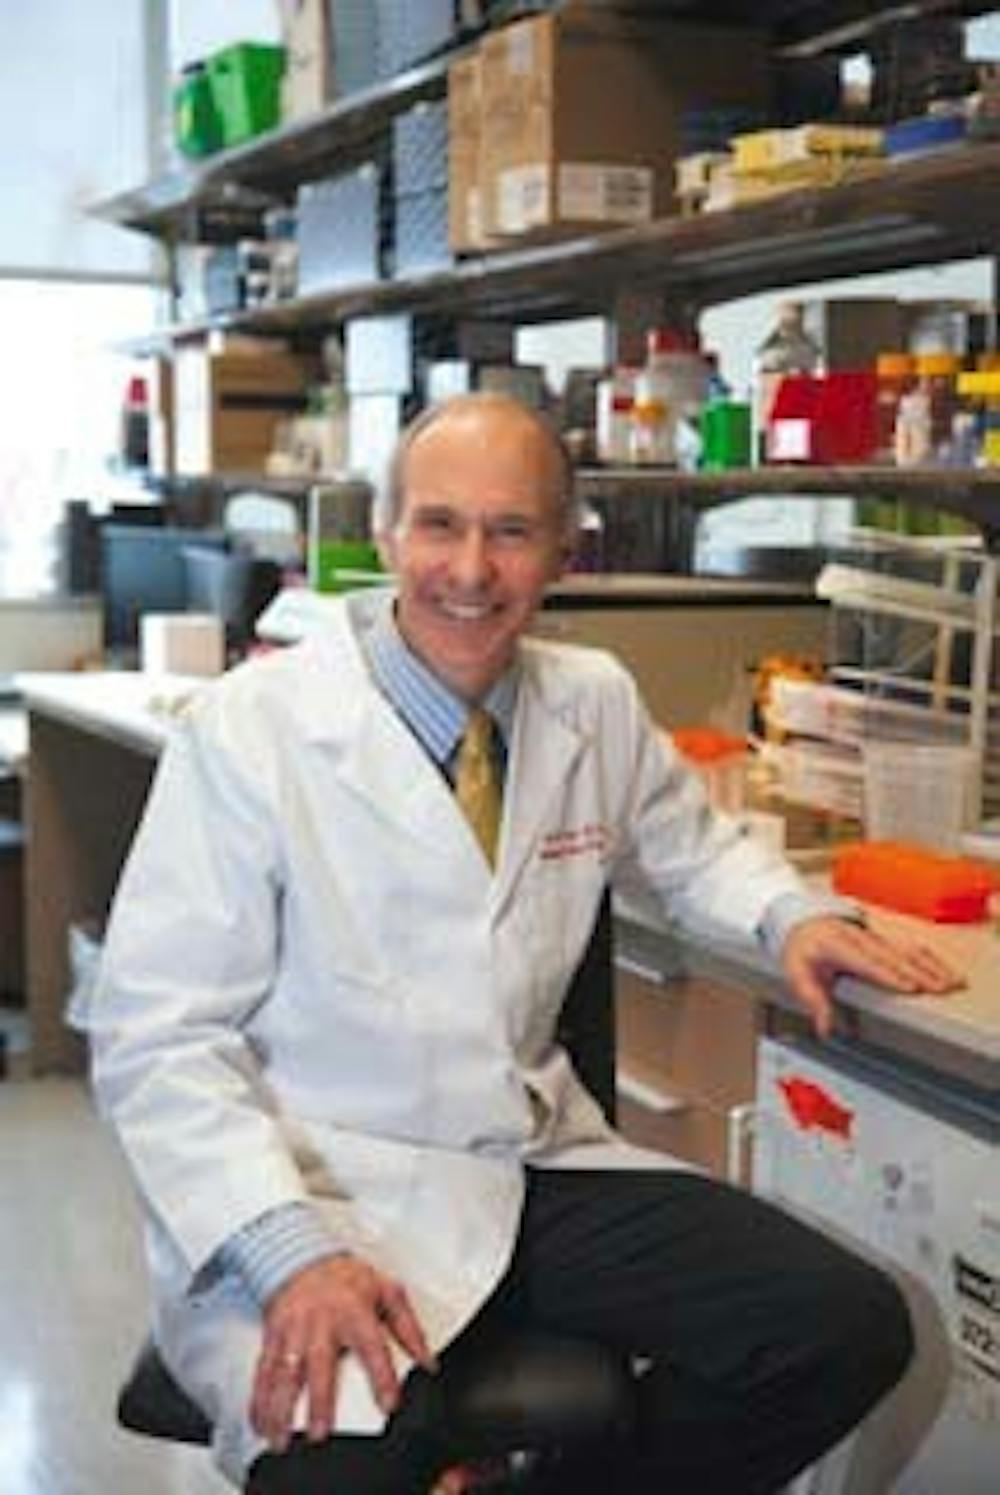 	Carl June and his research team had a breakthrough in T-cell immunotherapy after about two decades of working on the project.